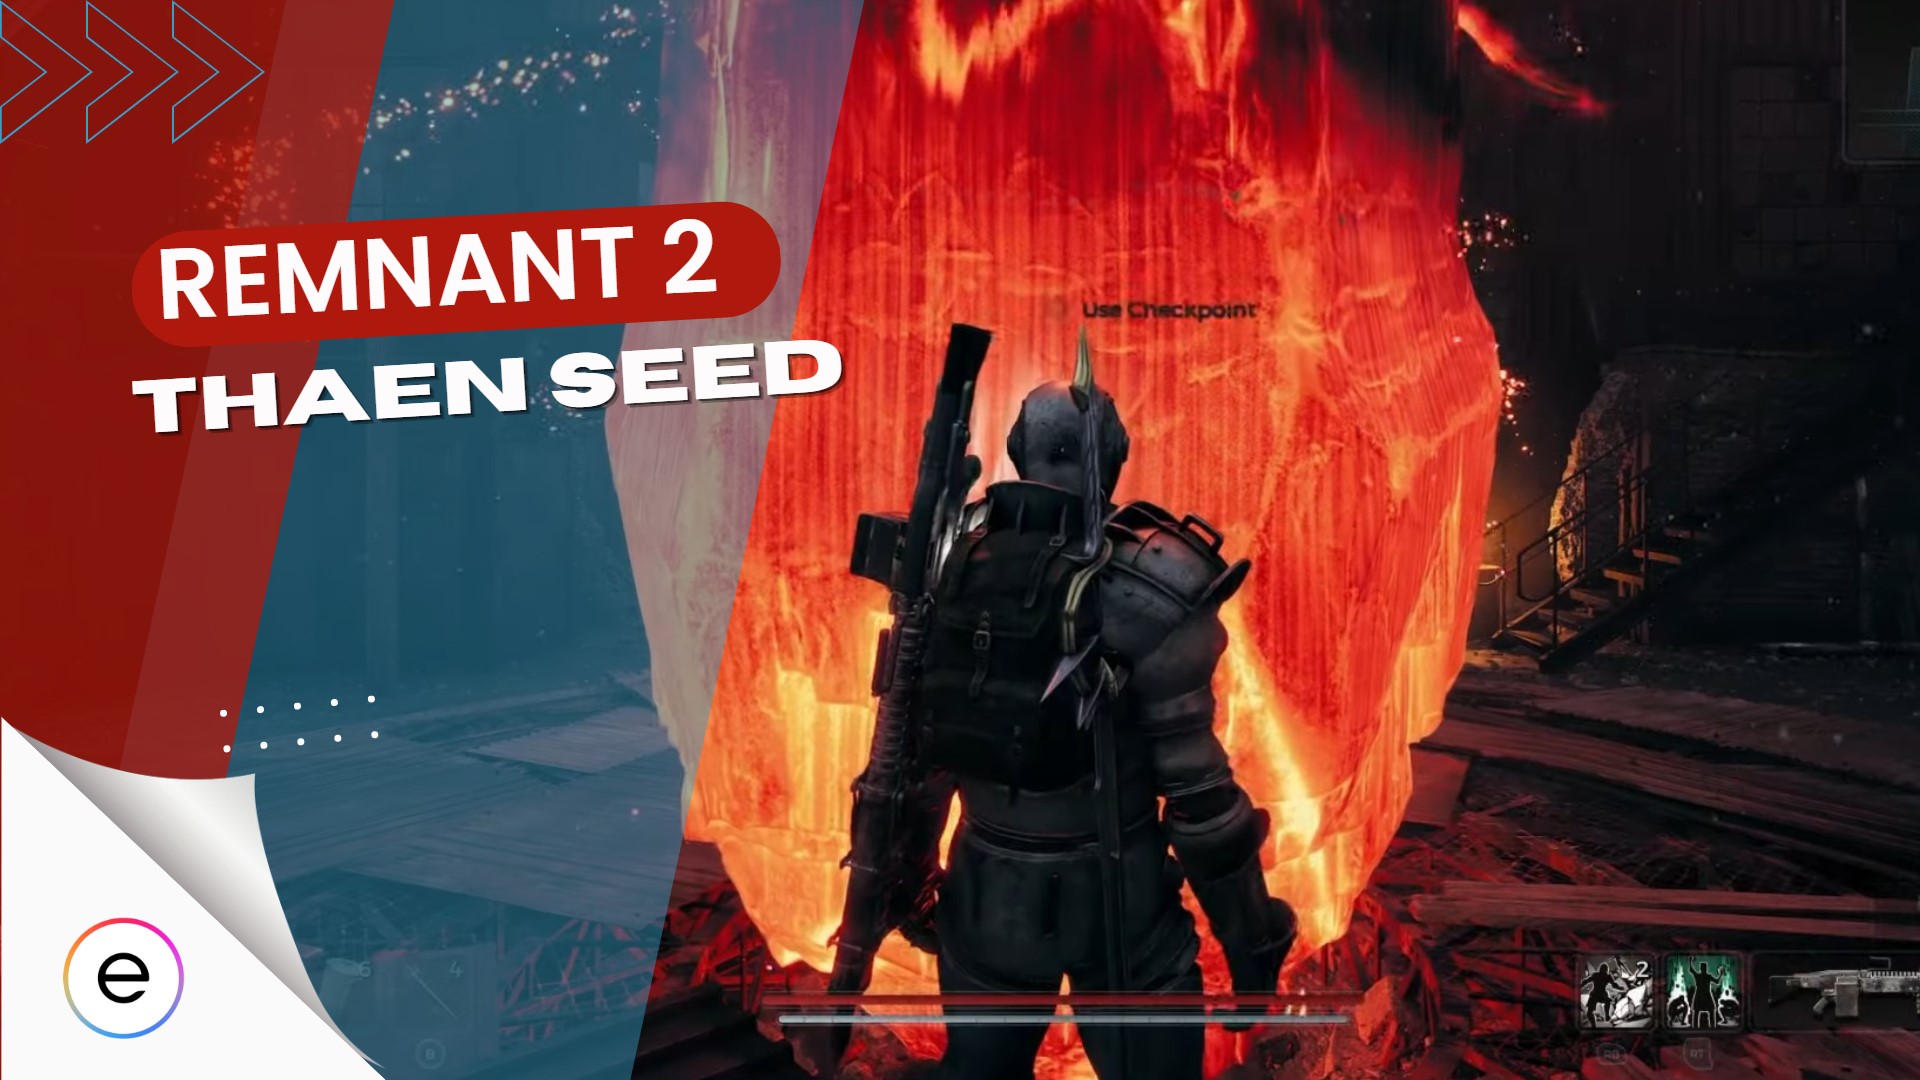 Thaen Seed in Remnant 2.